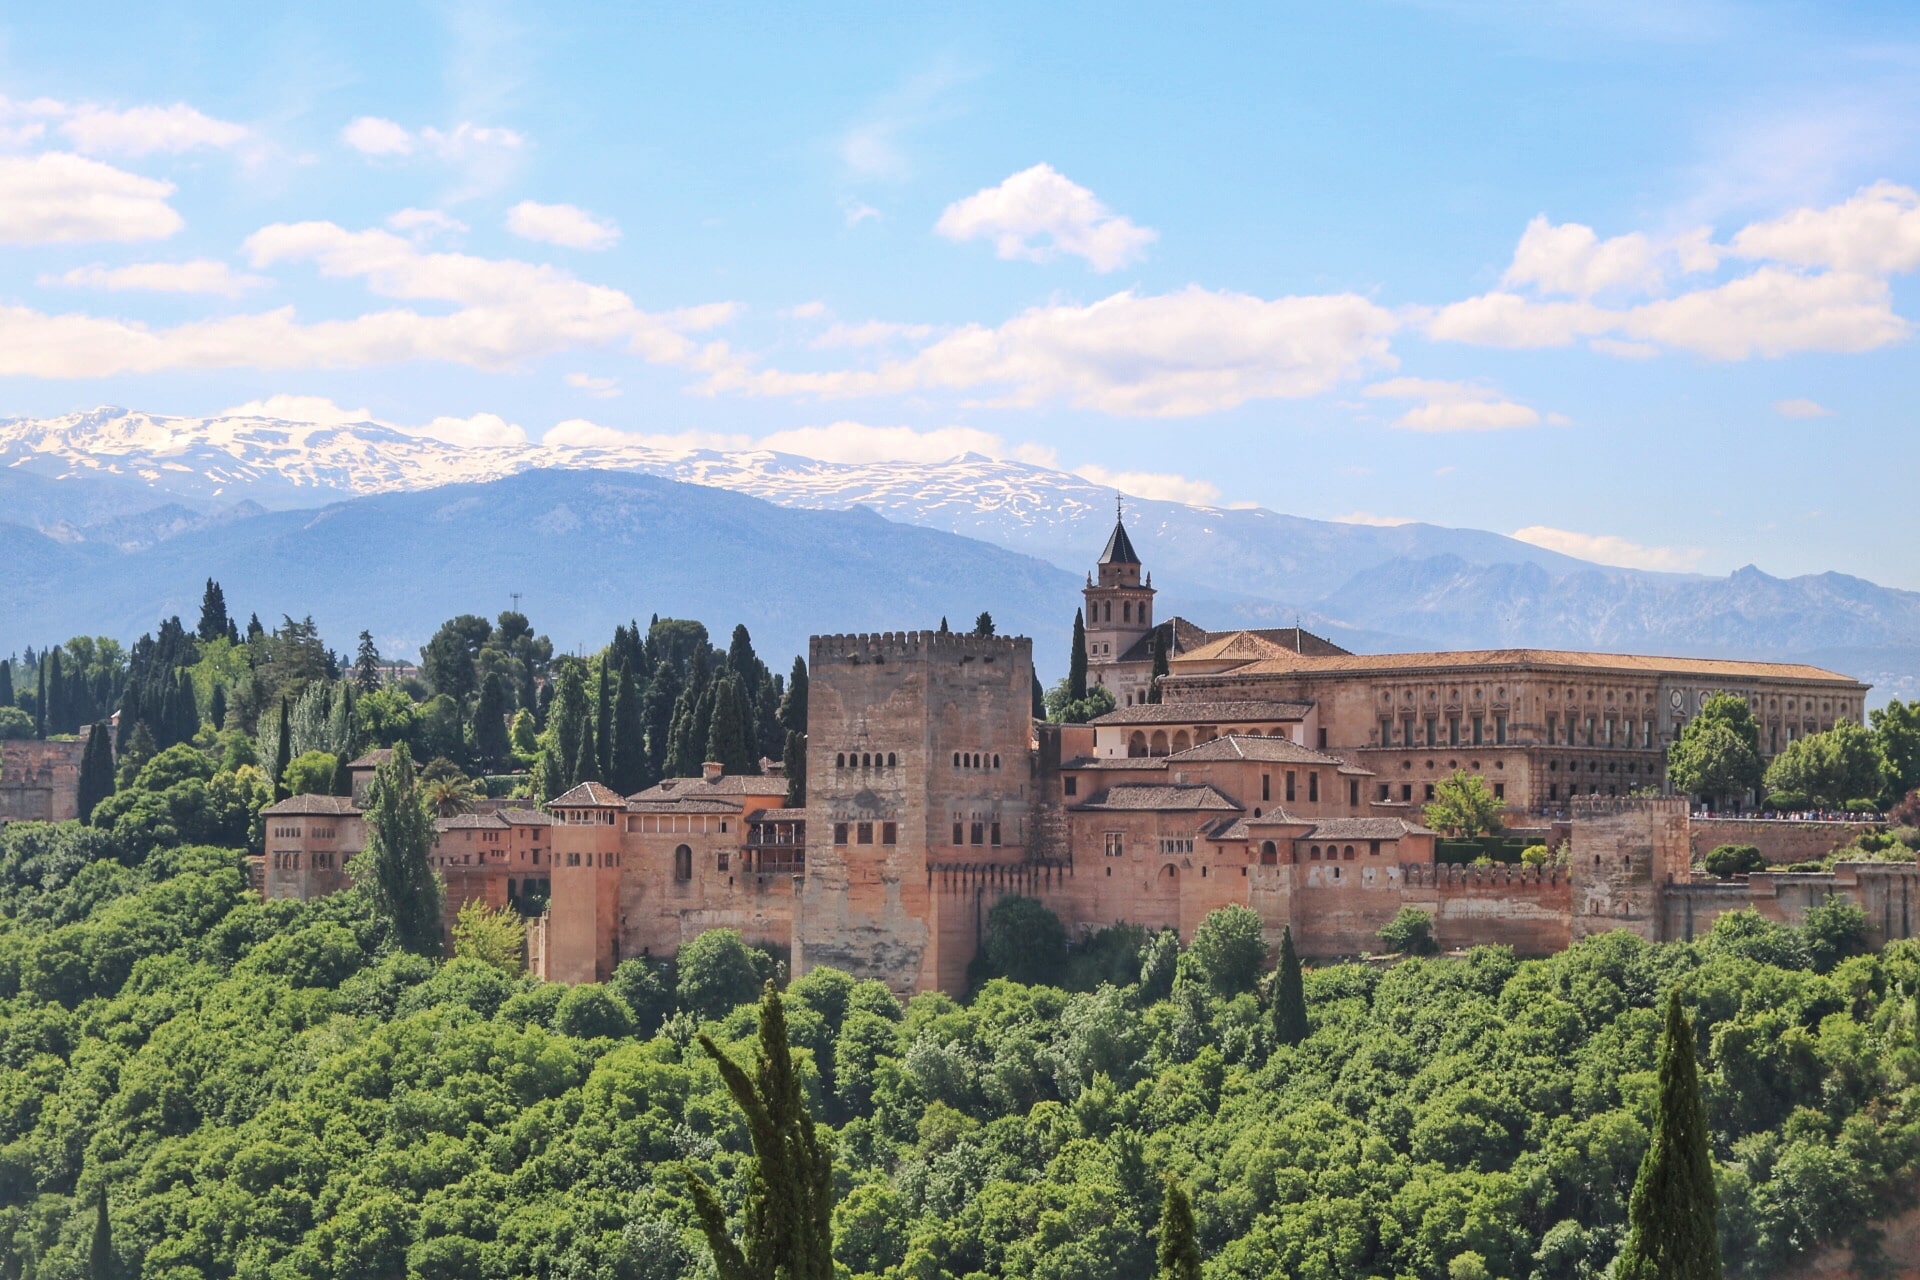 10 best tips for visiting the Alhambra, Granada (2023 guide)